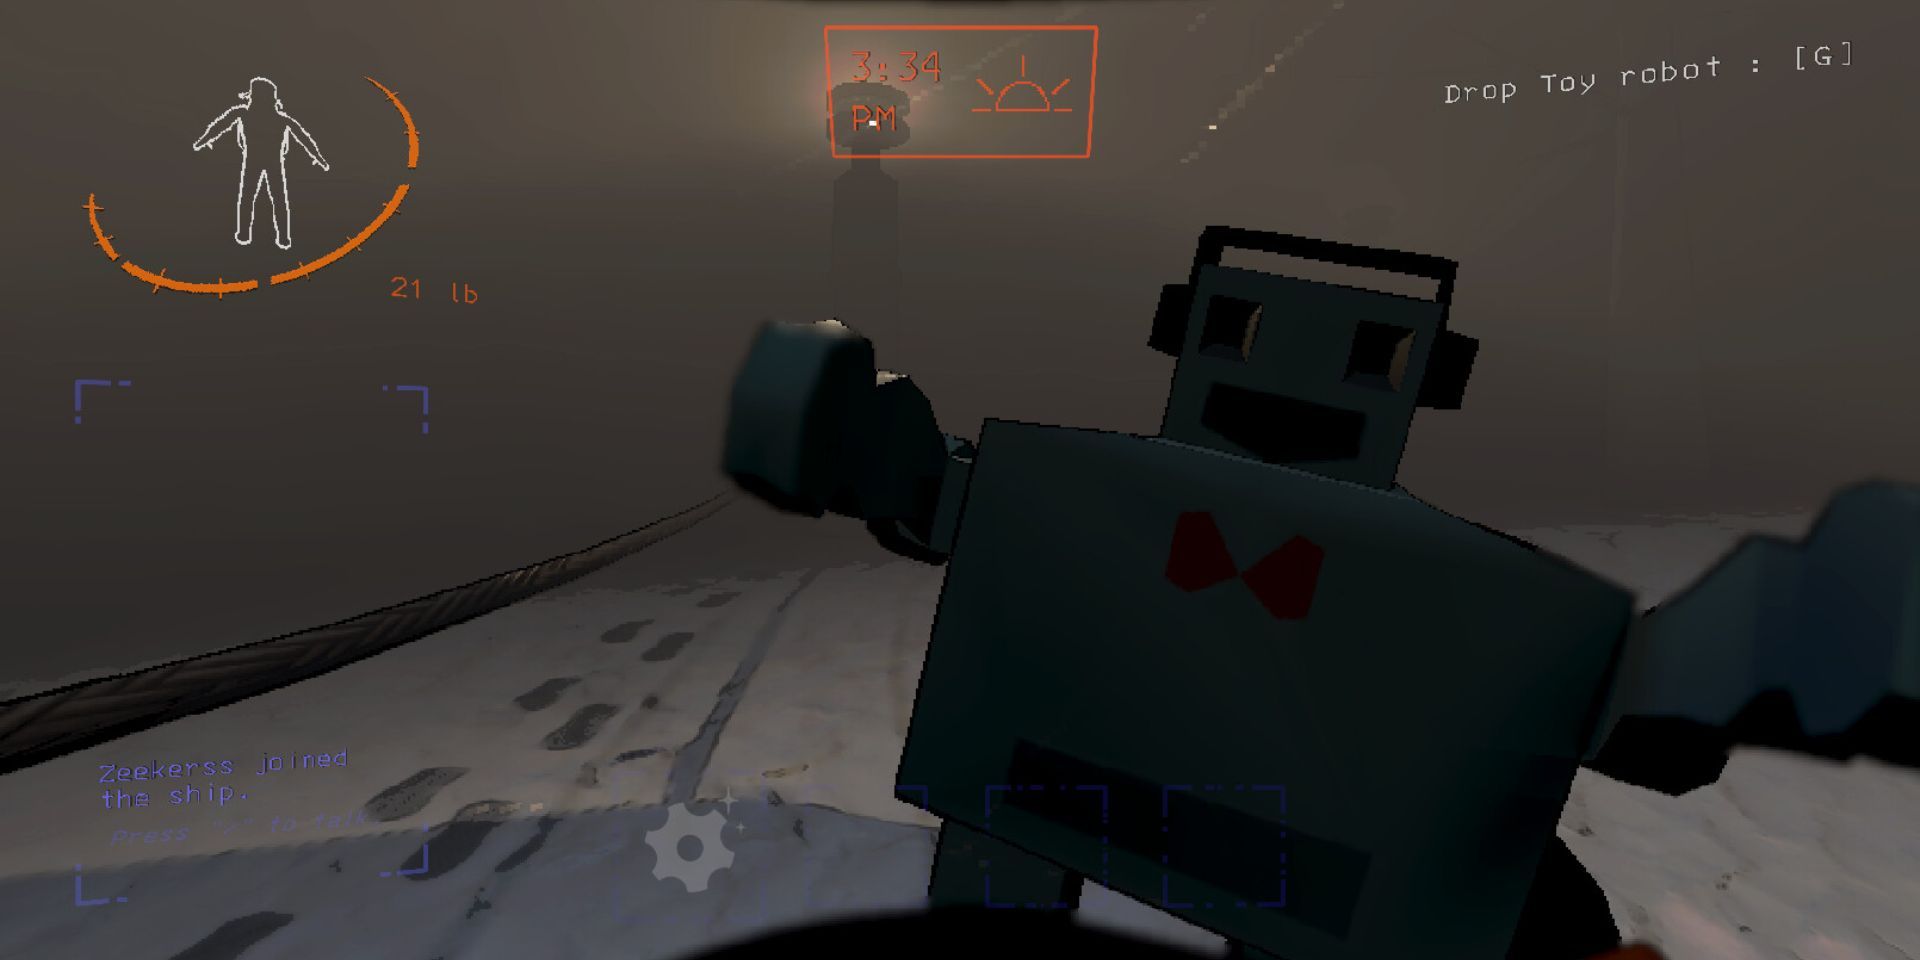 The player carries a toy robot in Lethal Company